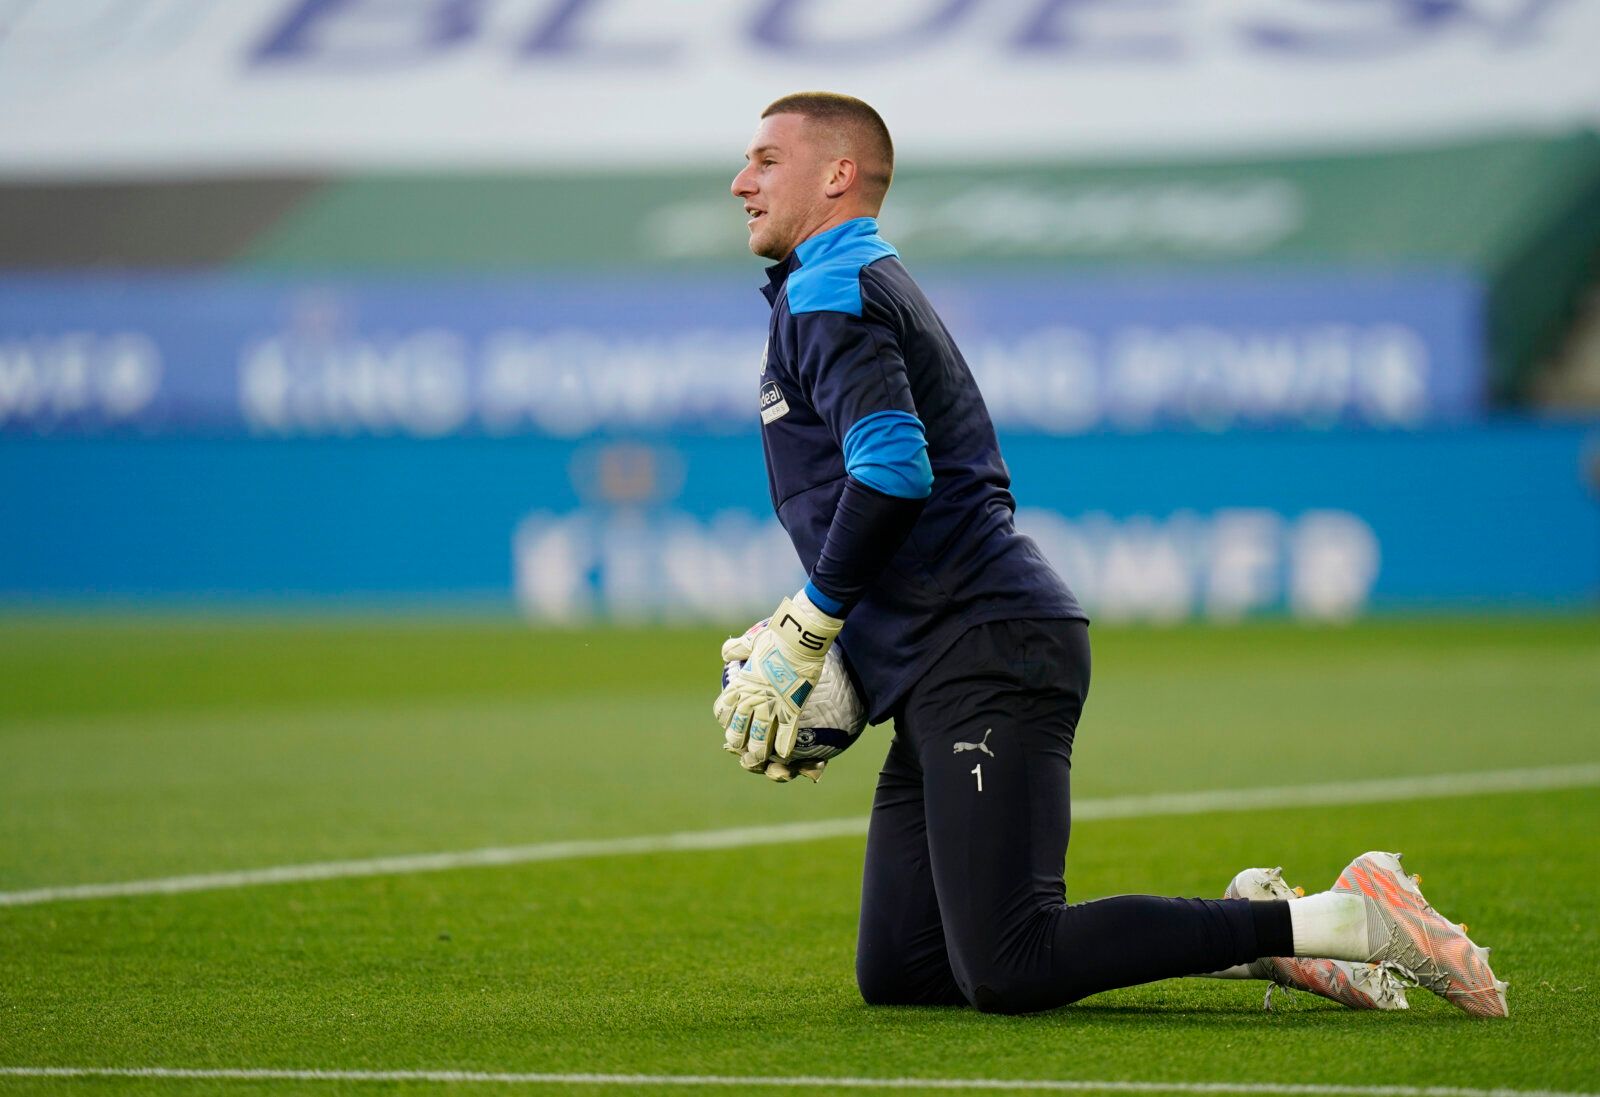 Soccer Football - Premier League - Leicester City v West Bromwich Albion - King Power Stadium, Leicester, Britain - April 22, 2021 West Bromwich Albion's Sam Johnstone during the warm up before the match Pool via REUTERS/Tim Keeton EDITORIAL USE ONLY. No use with unauthorized audio, video, data, fixture lists, club/league logos or 'live' services. Online in-match use limited to 75 images, no video emulation. No use in betting, games or single club /league/player publications.  Please contact you